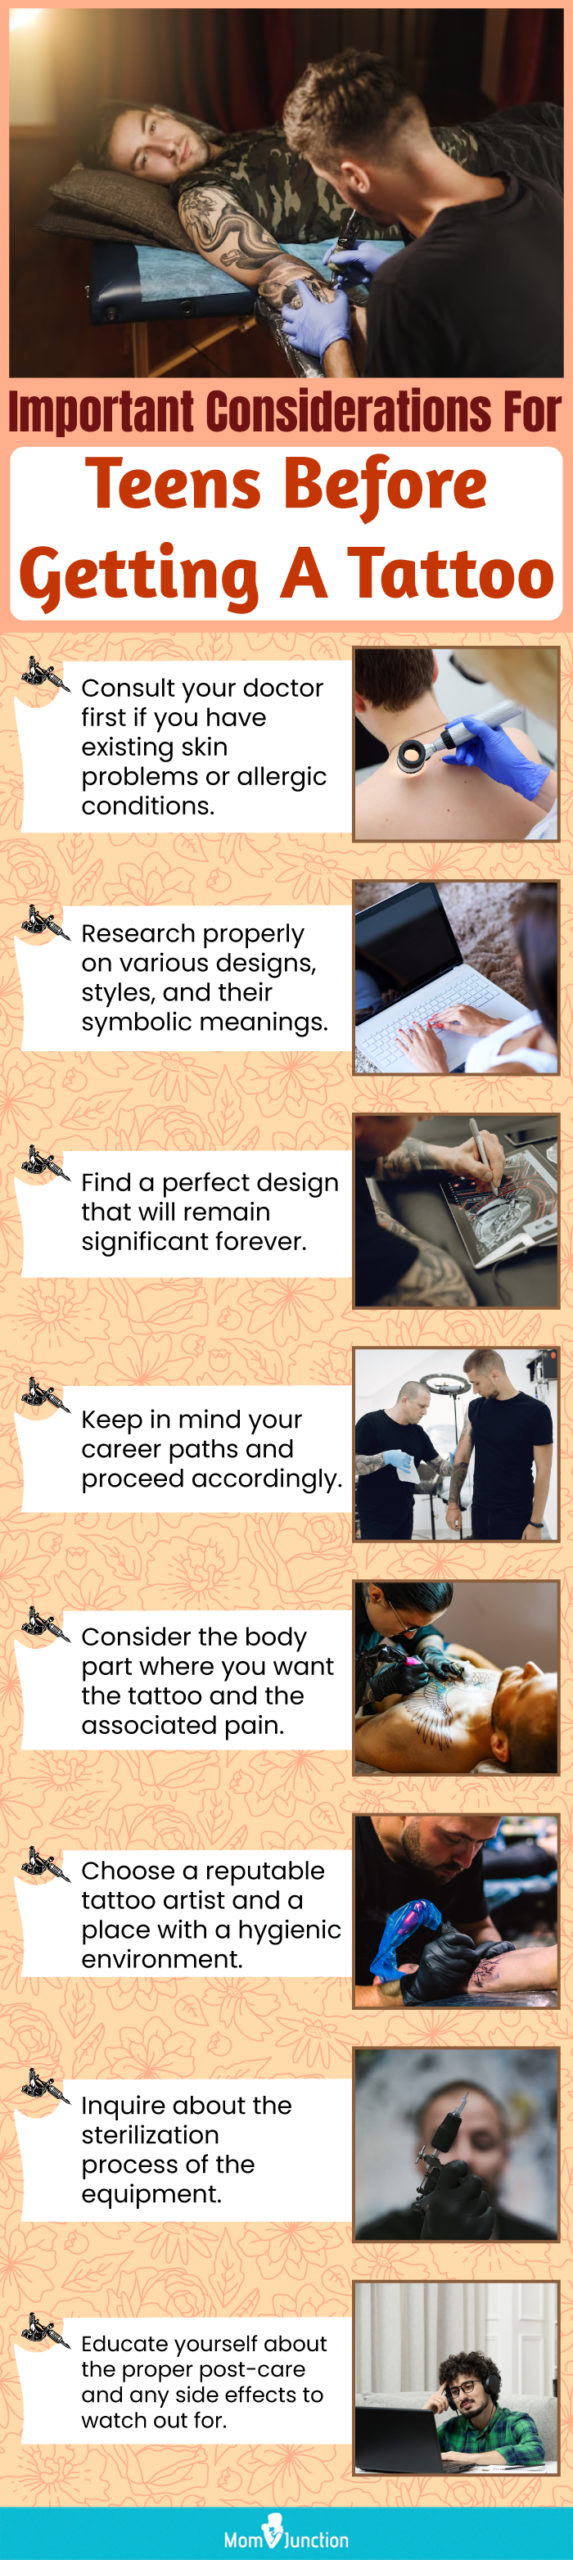 important considerations for teens before getting a tattoo (infographic)